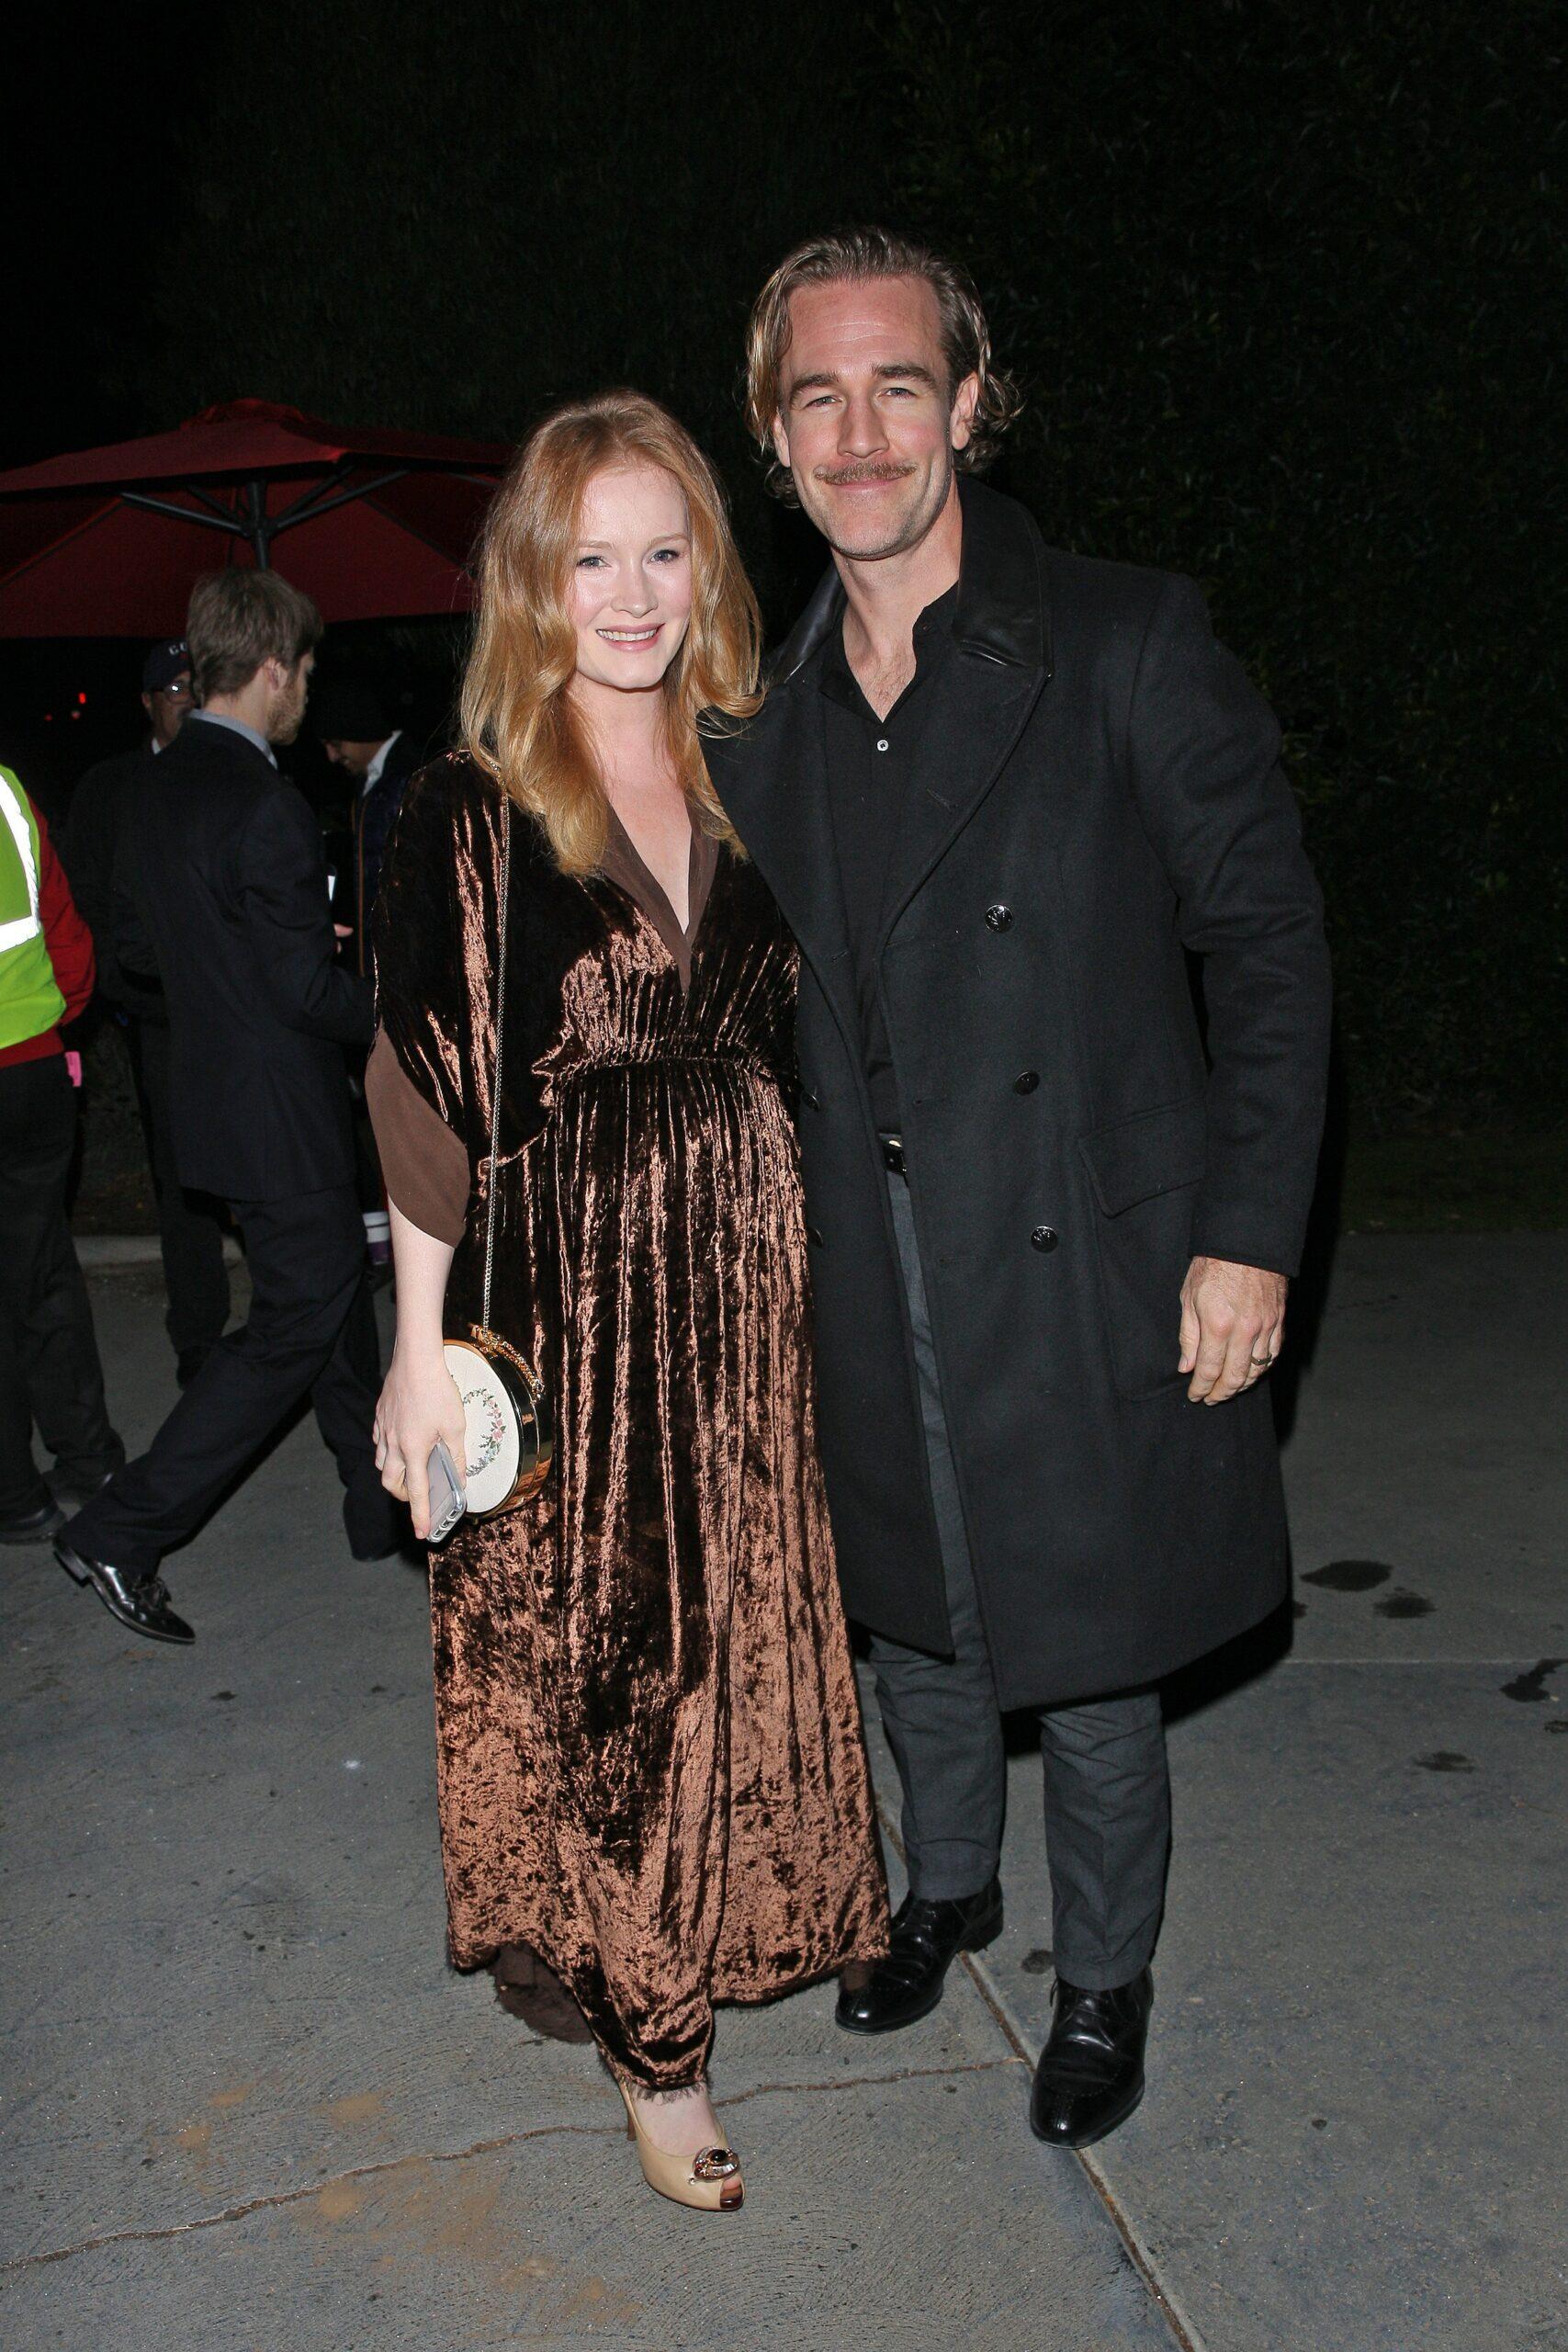 James Van Der Beek and his wife Kimberly Brook are seen attending Jennifer Klein's holiday party